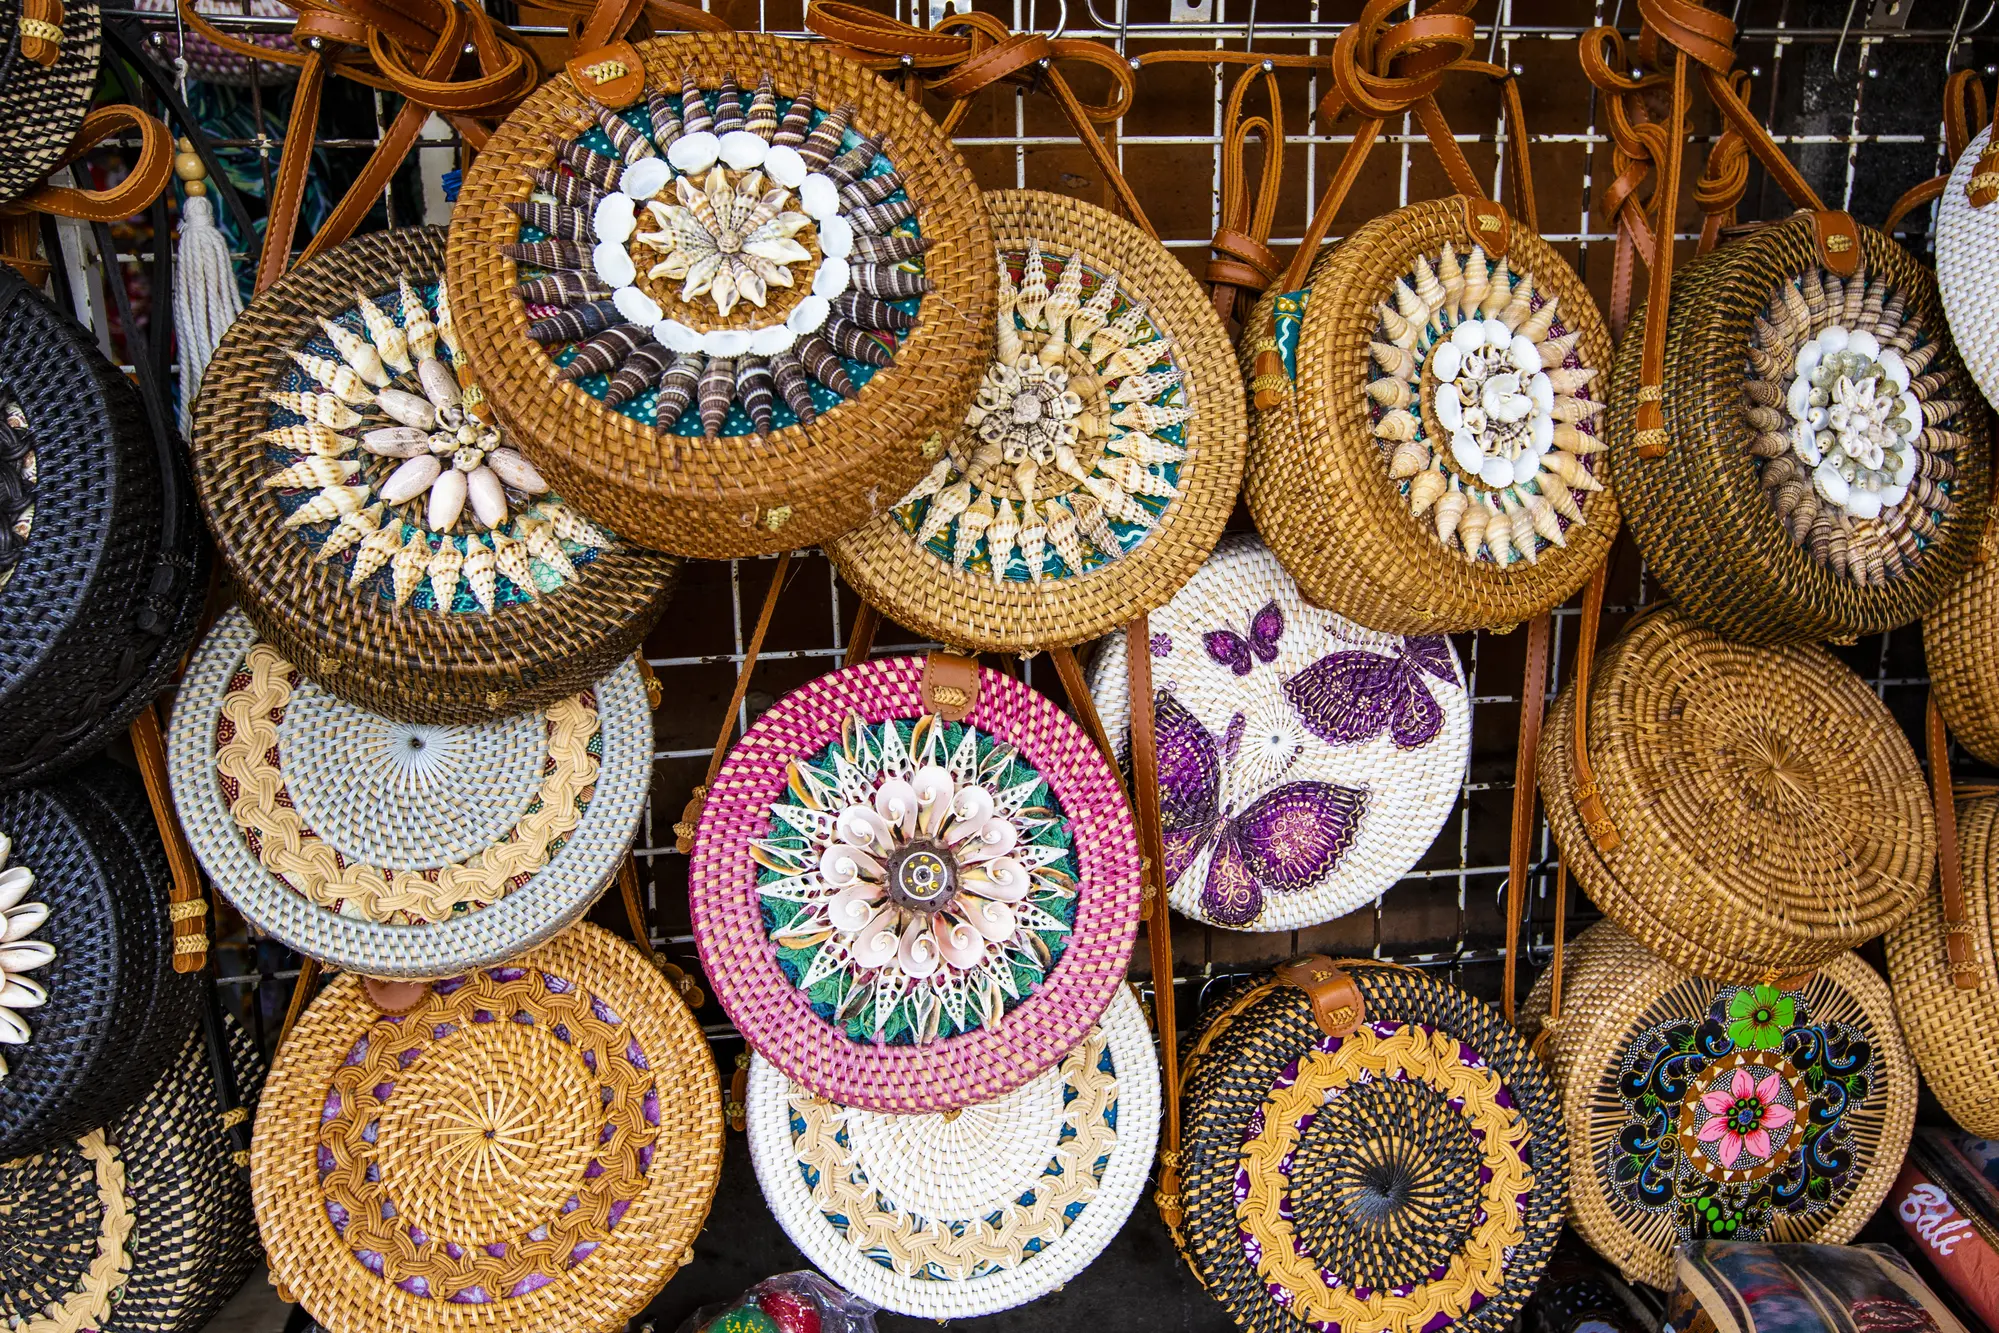 A wall of round rattan bags in different colors with seashells at Ubud Art Market, one of the most popular markets in Bali.